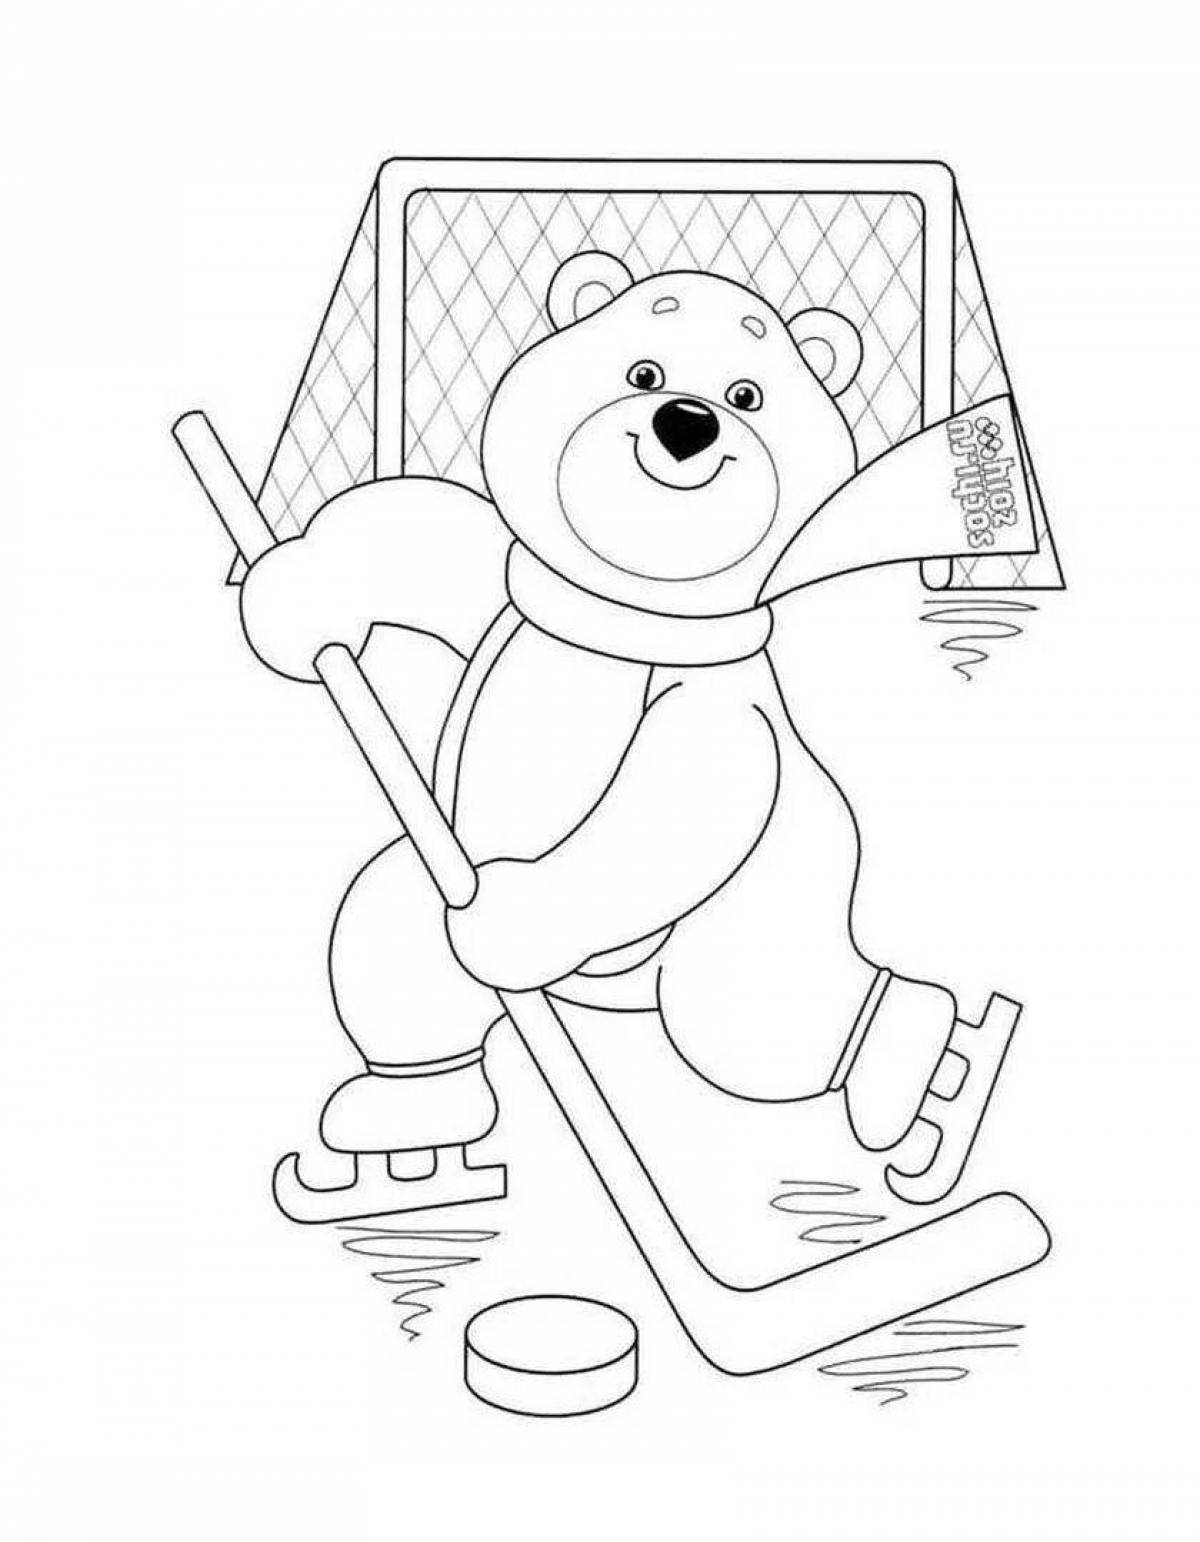 Glorious olympic games coloring book for kids